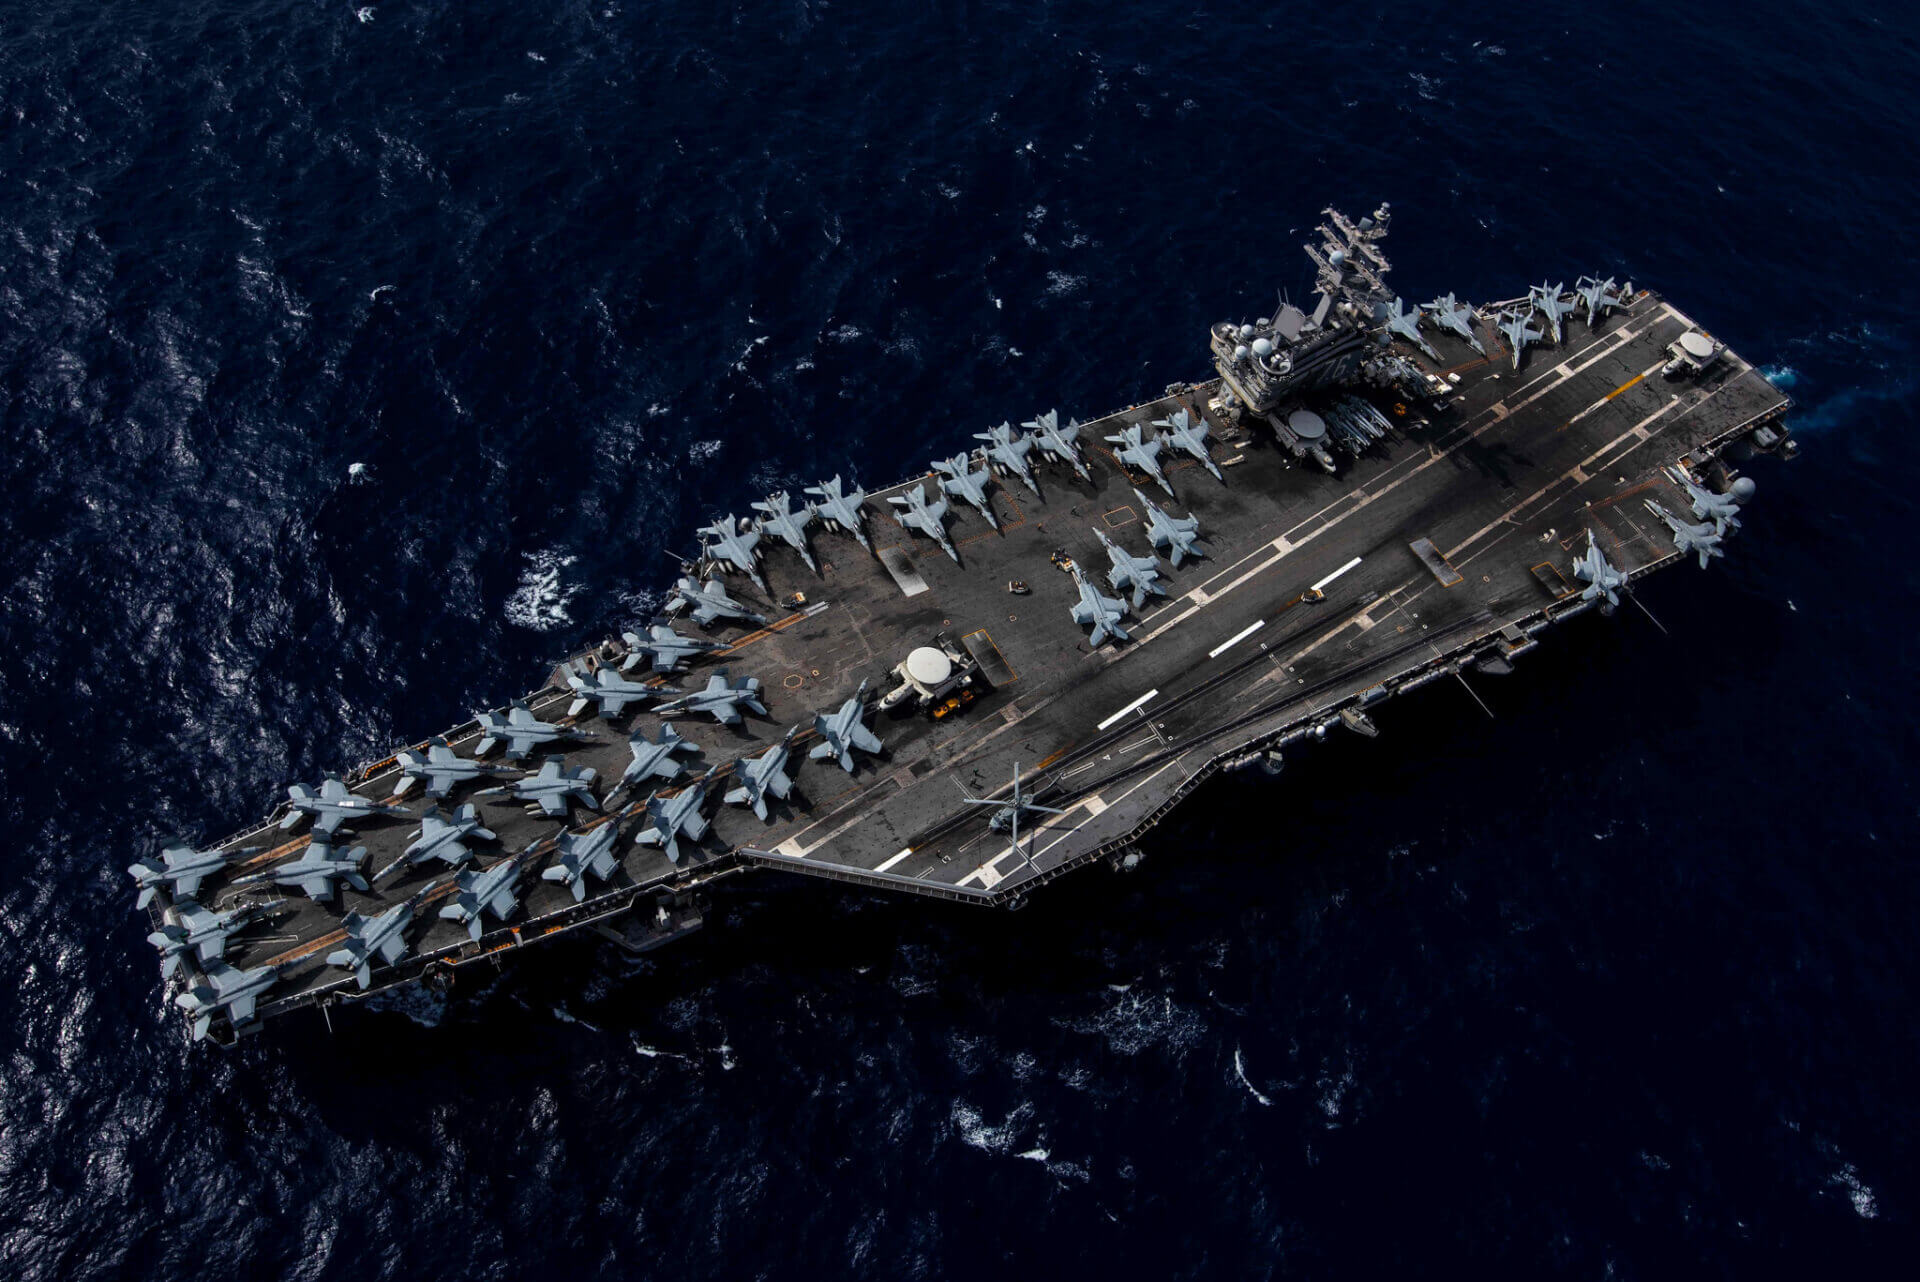 US Carrier to Dock in Vietnam in Rare Move Amid Escalating Tensions in South China Sea